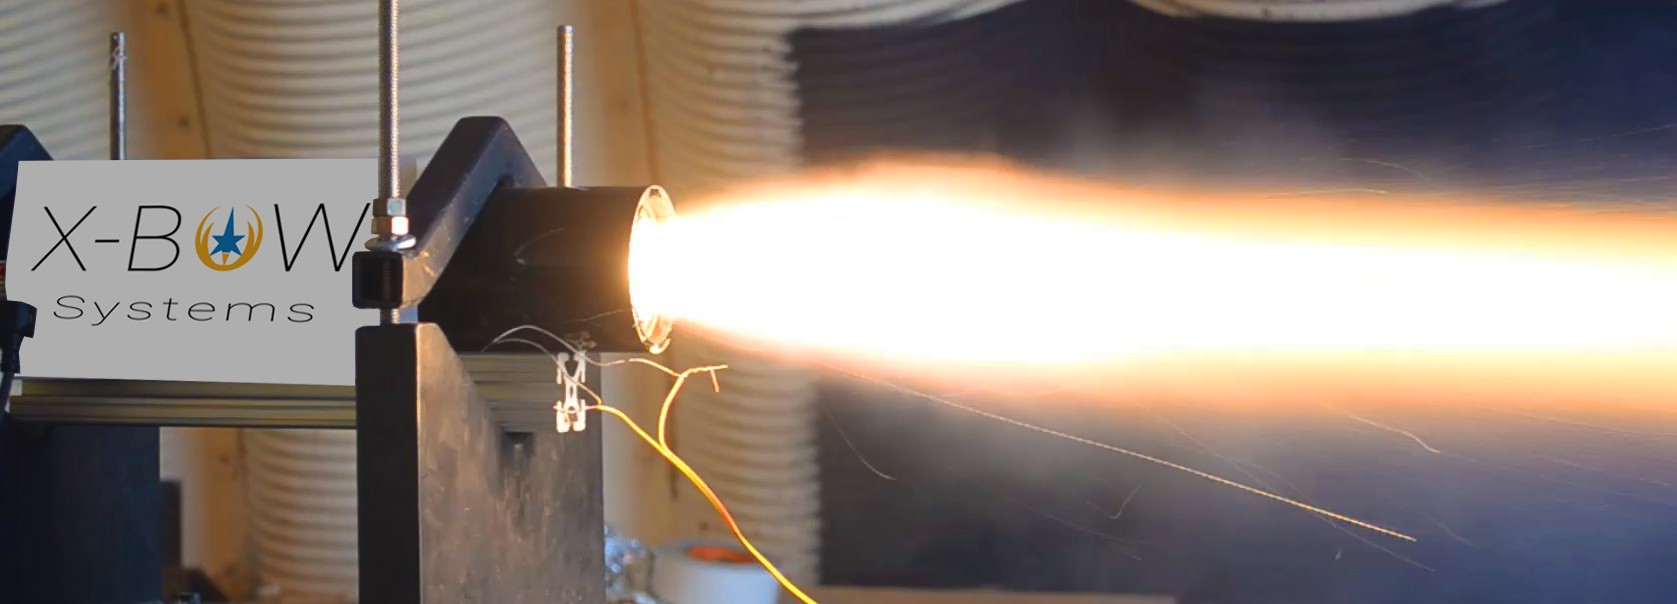 X-Bow Exits Stealth Mode with Stable 3D Printed Rocket Motors – 3DPrint.com